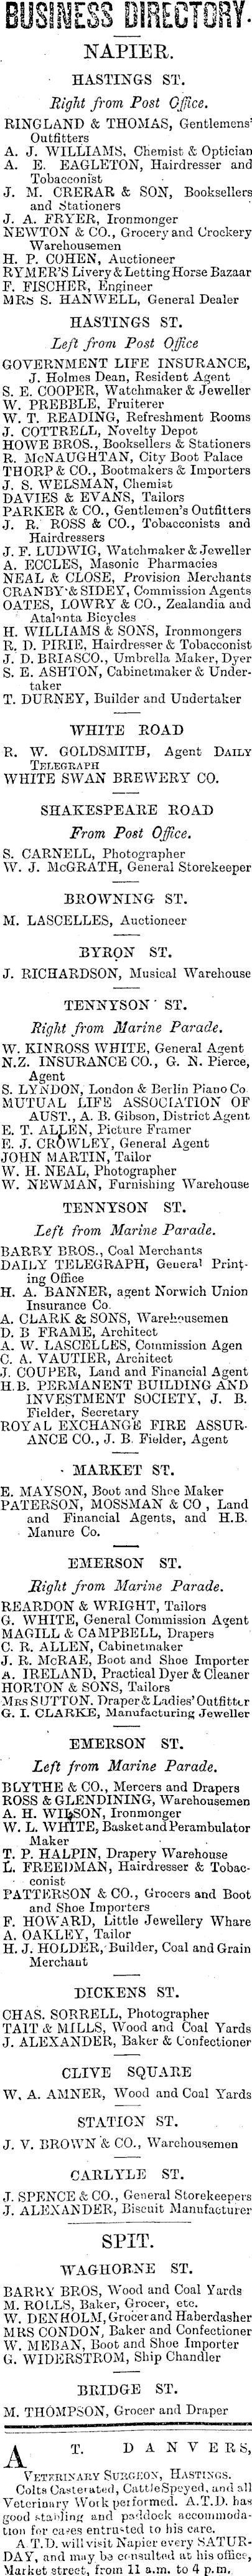 Papers Past Newspapers Daily Telegraph 19 February 1900 Page 7 Advertisements Column 3